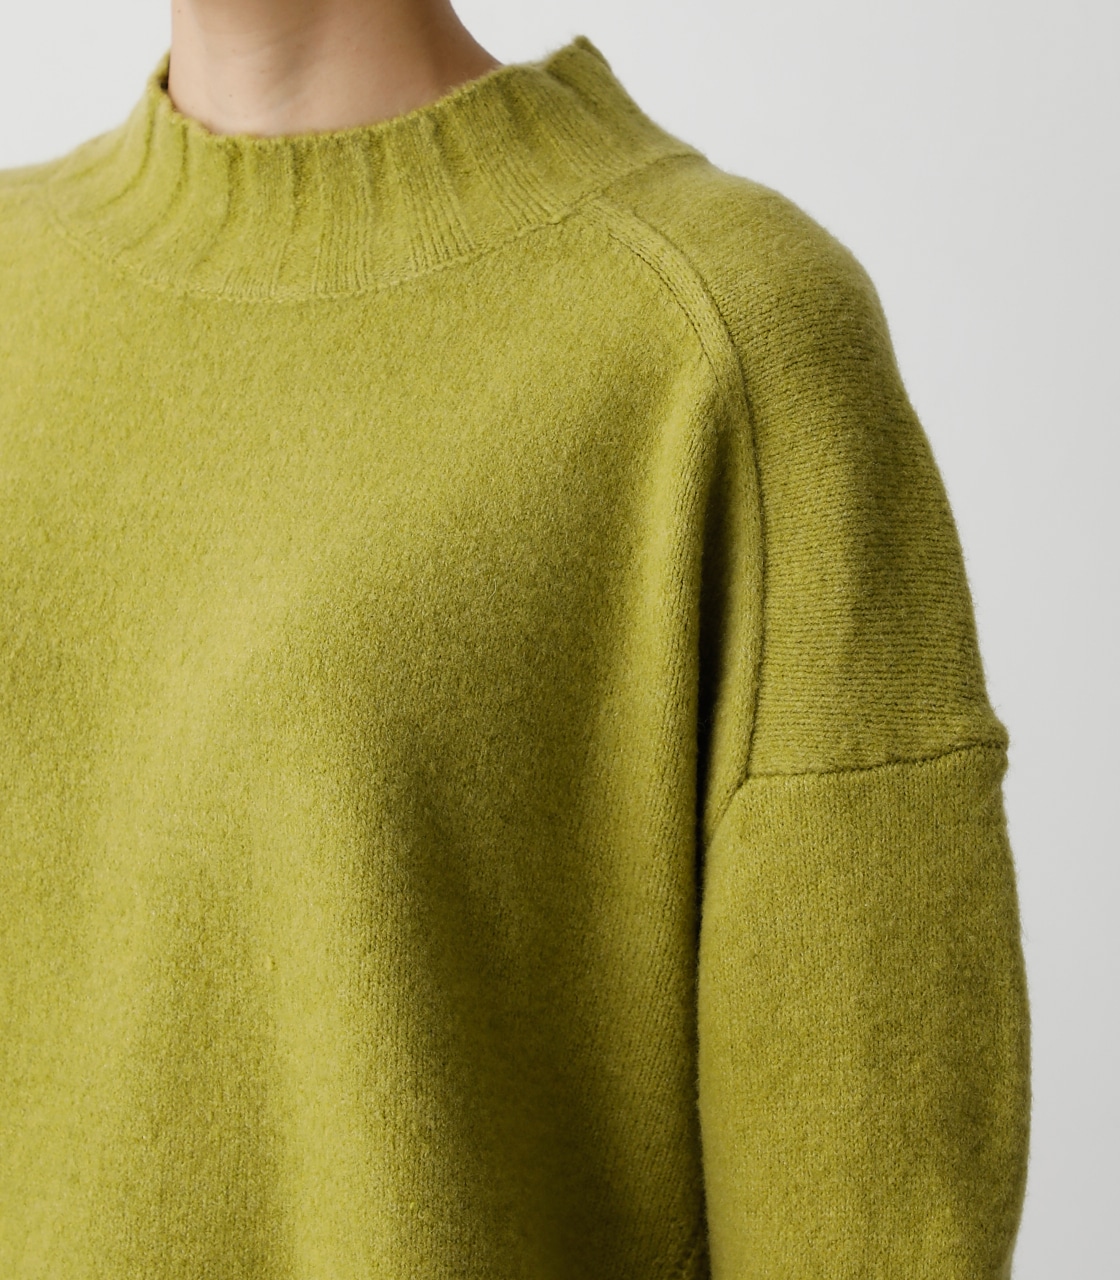 SOFT TOUCH HIGH NECK KNIT TOPS/ソフトタッチハイネックニットトップス 詳細画像 LIME 8